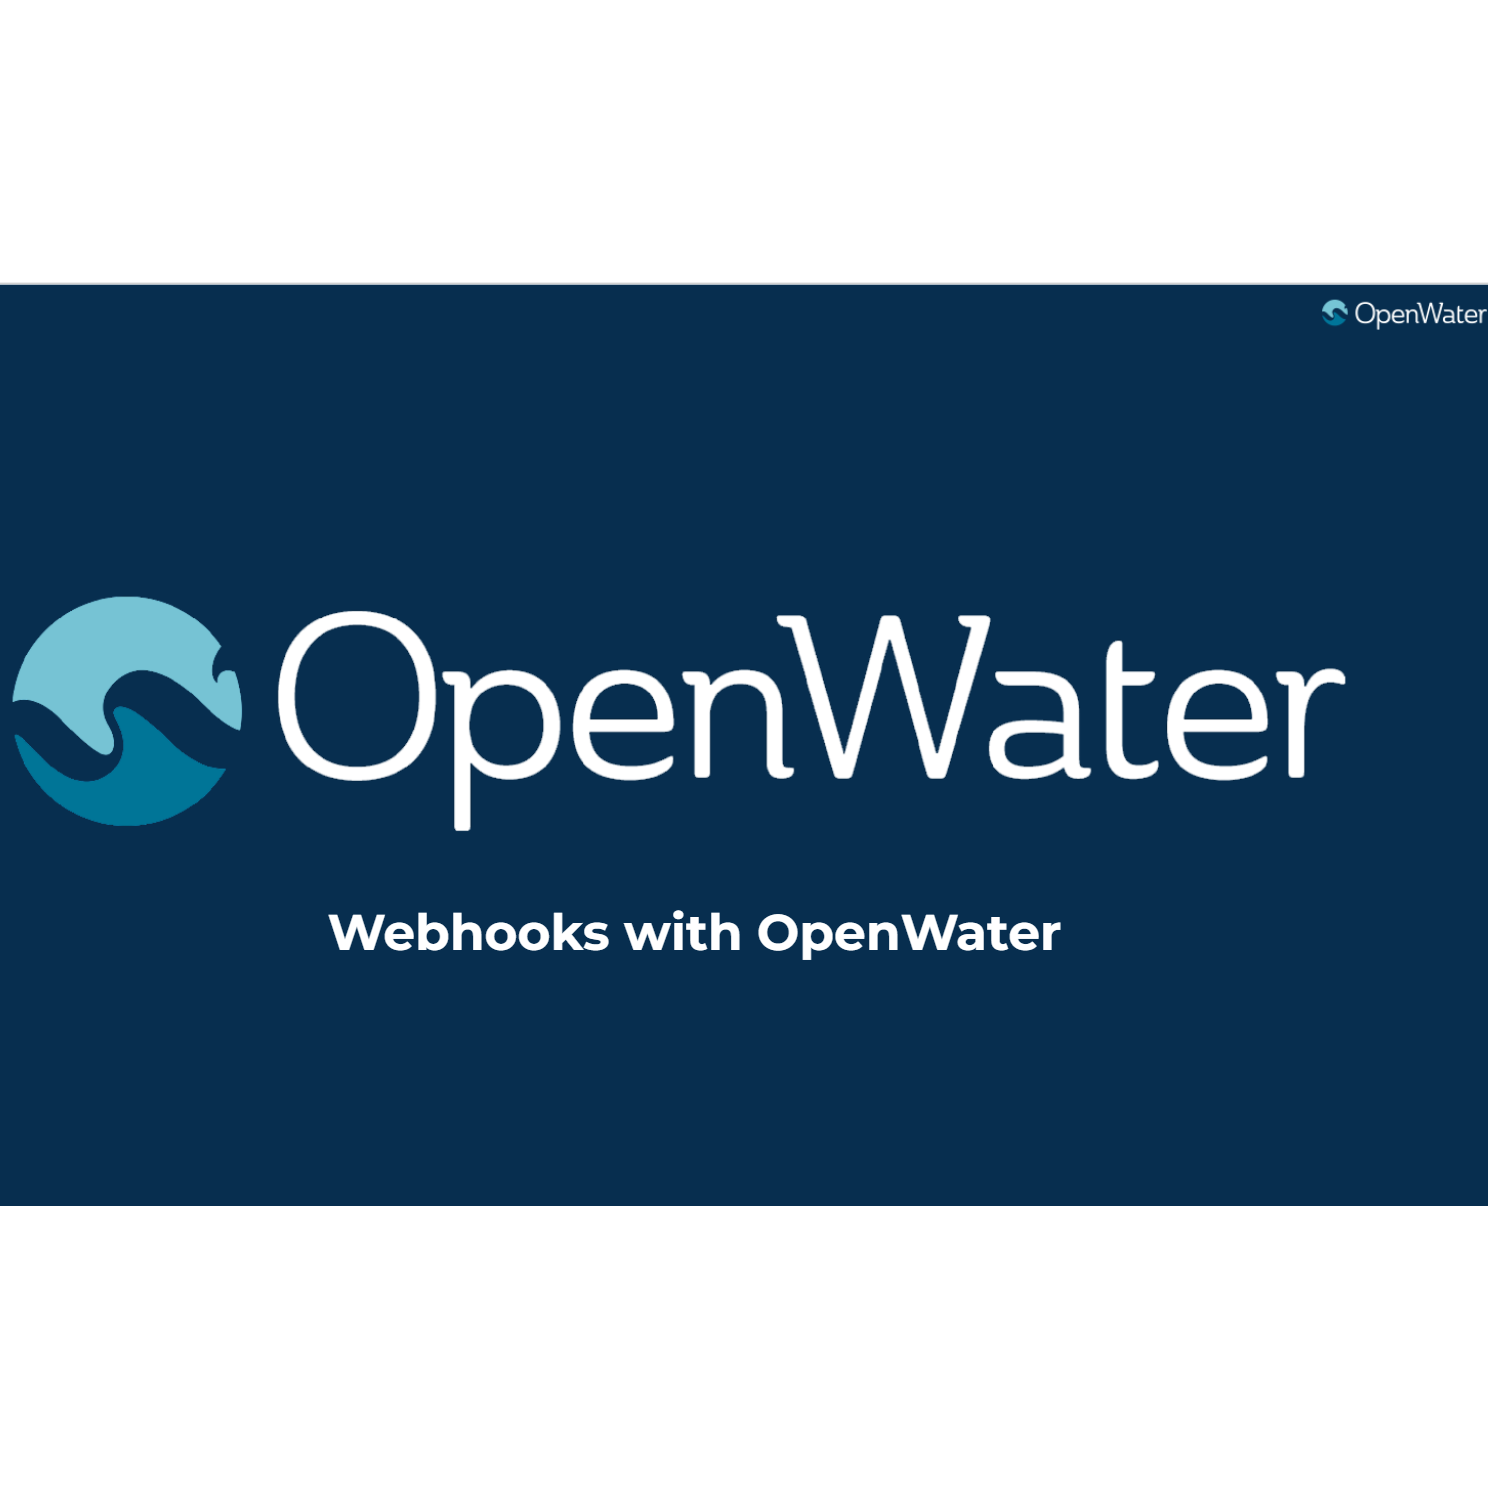 Webhooks with OpenWater